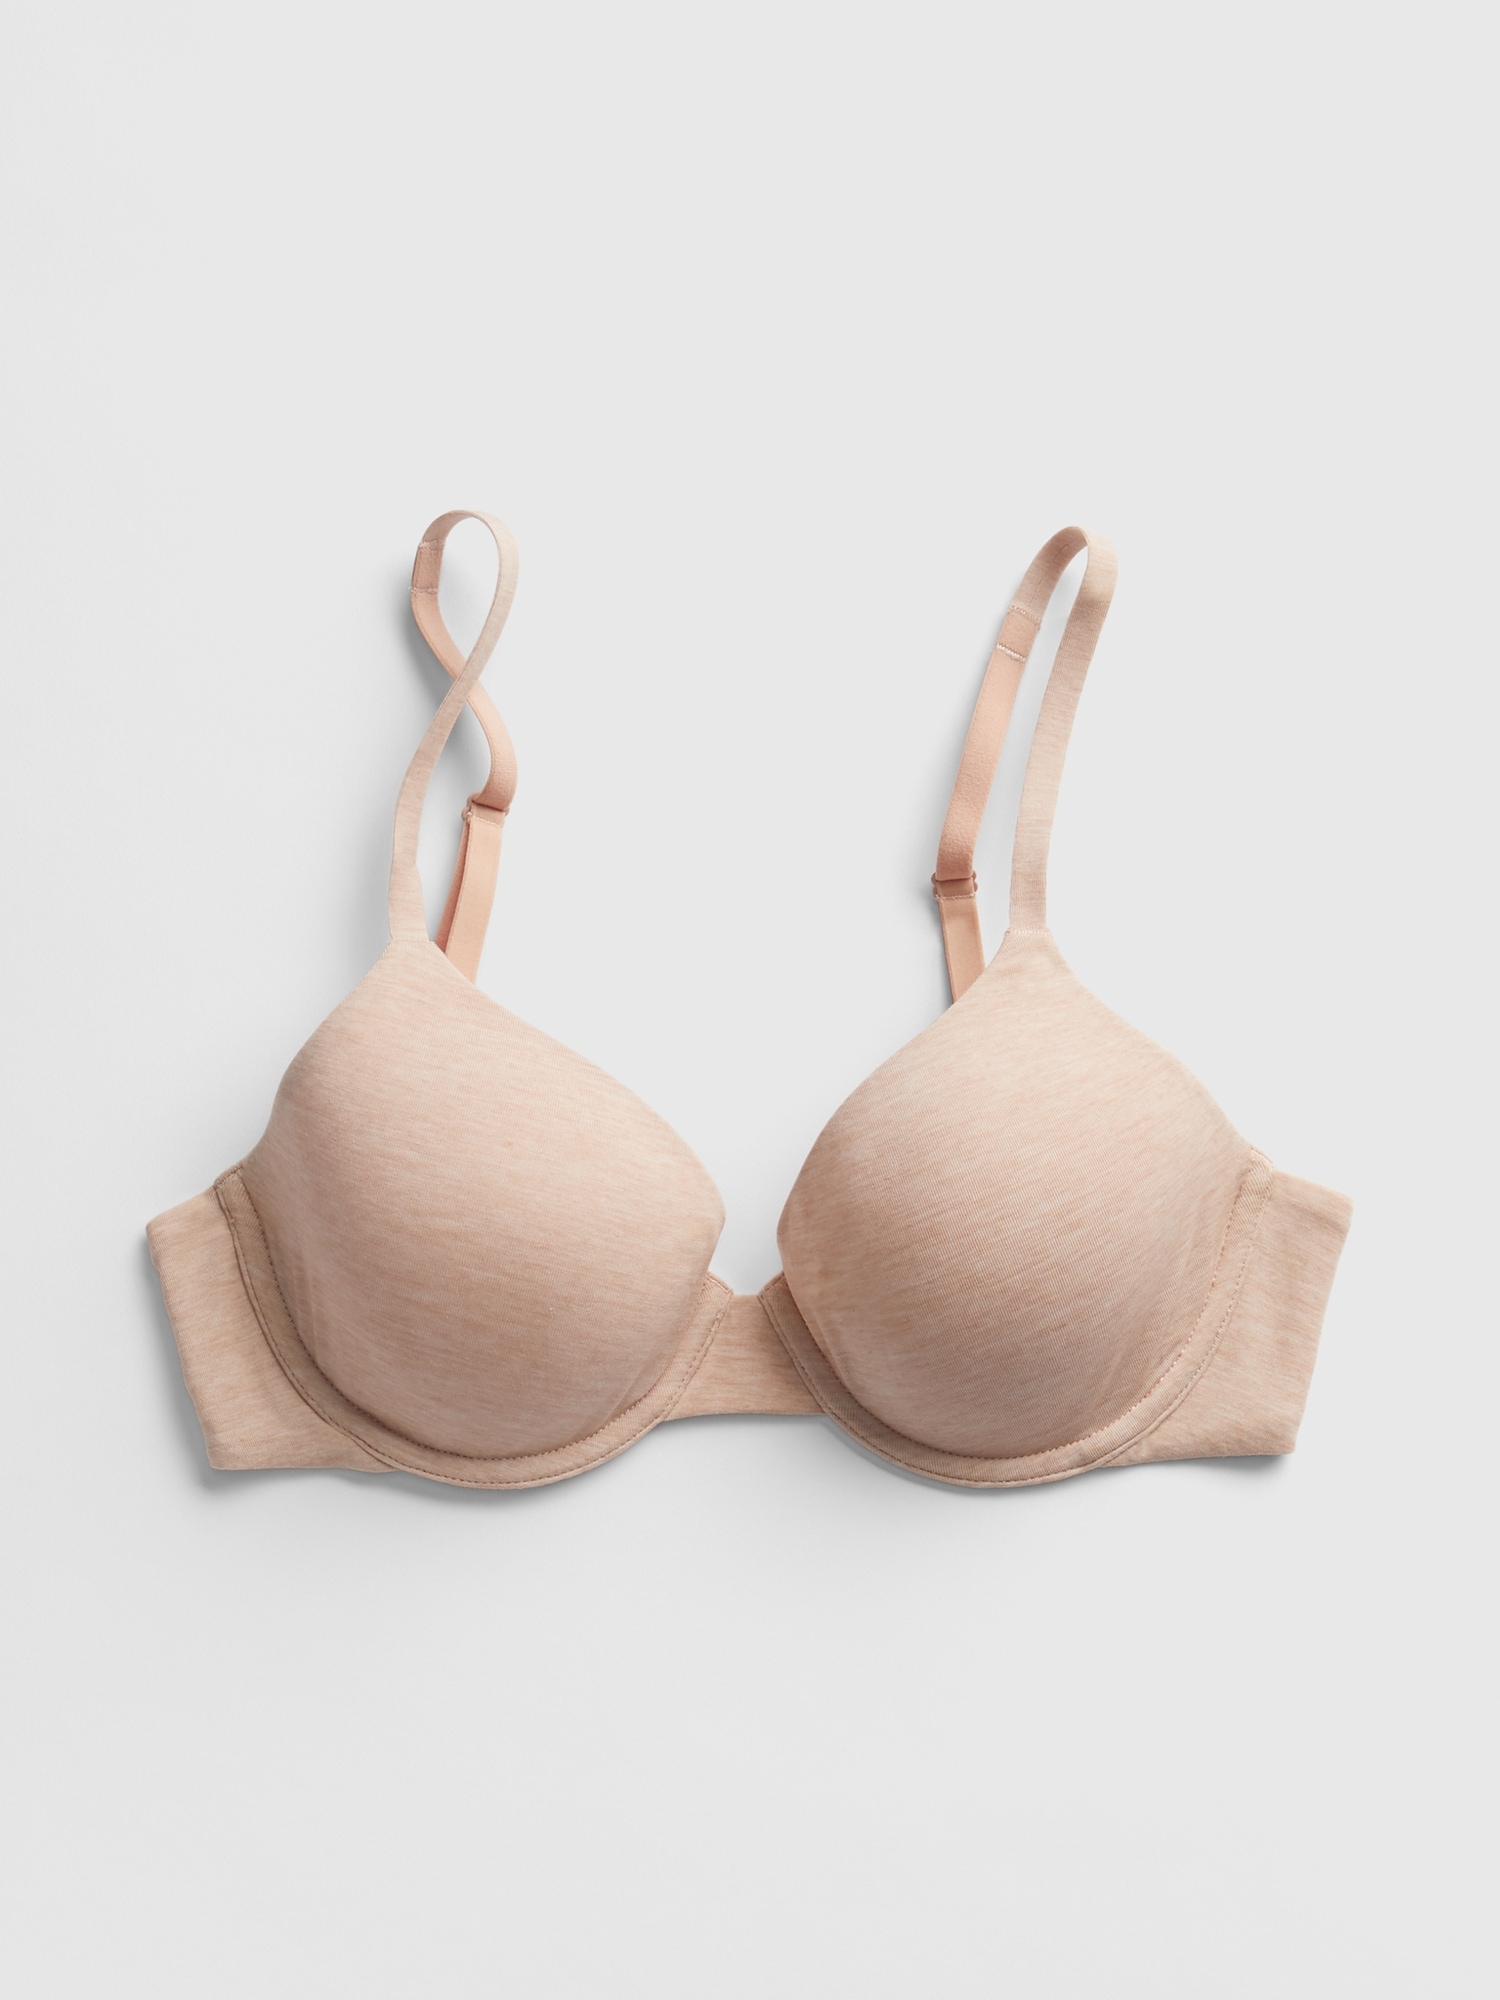 Little Women Collection, 28AA to 40B Bras